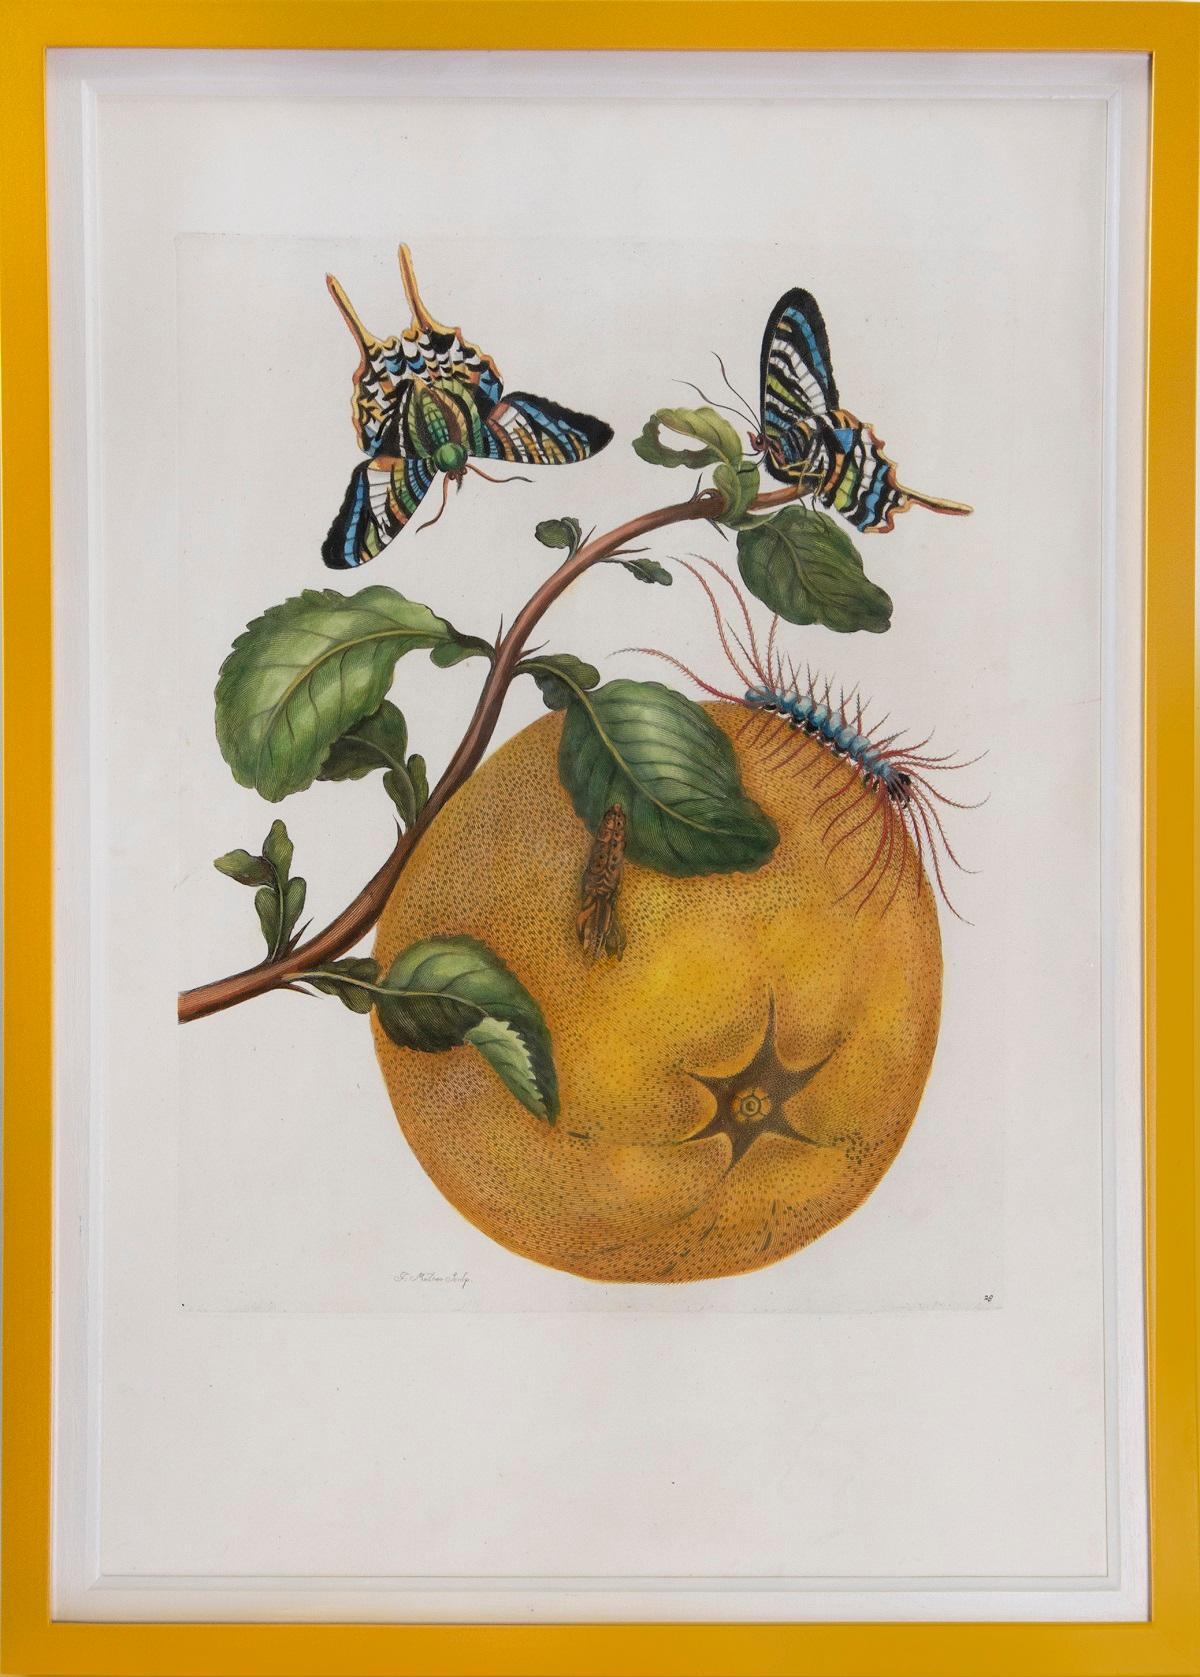 Merian - A Group of Six Flowers, Insects and Fruits.   - Beige Animal Print by Maria Sybilla Merian